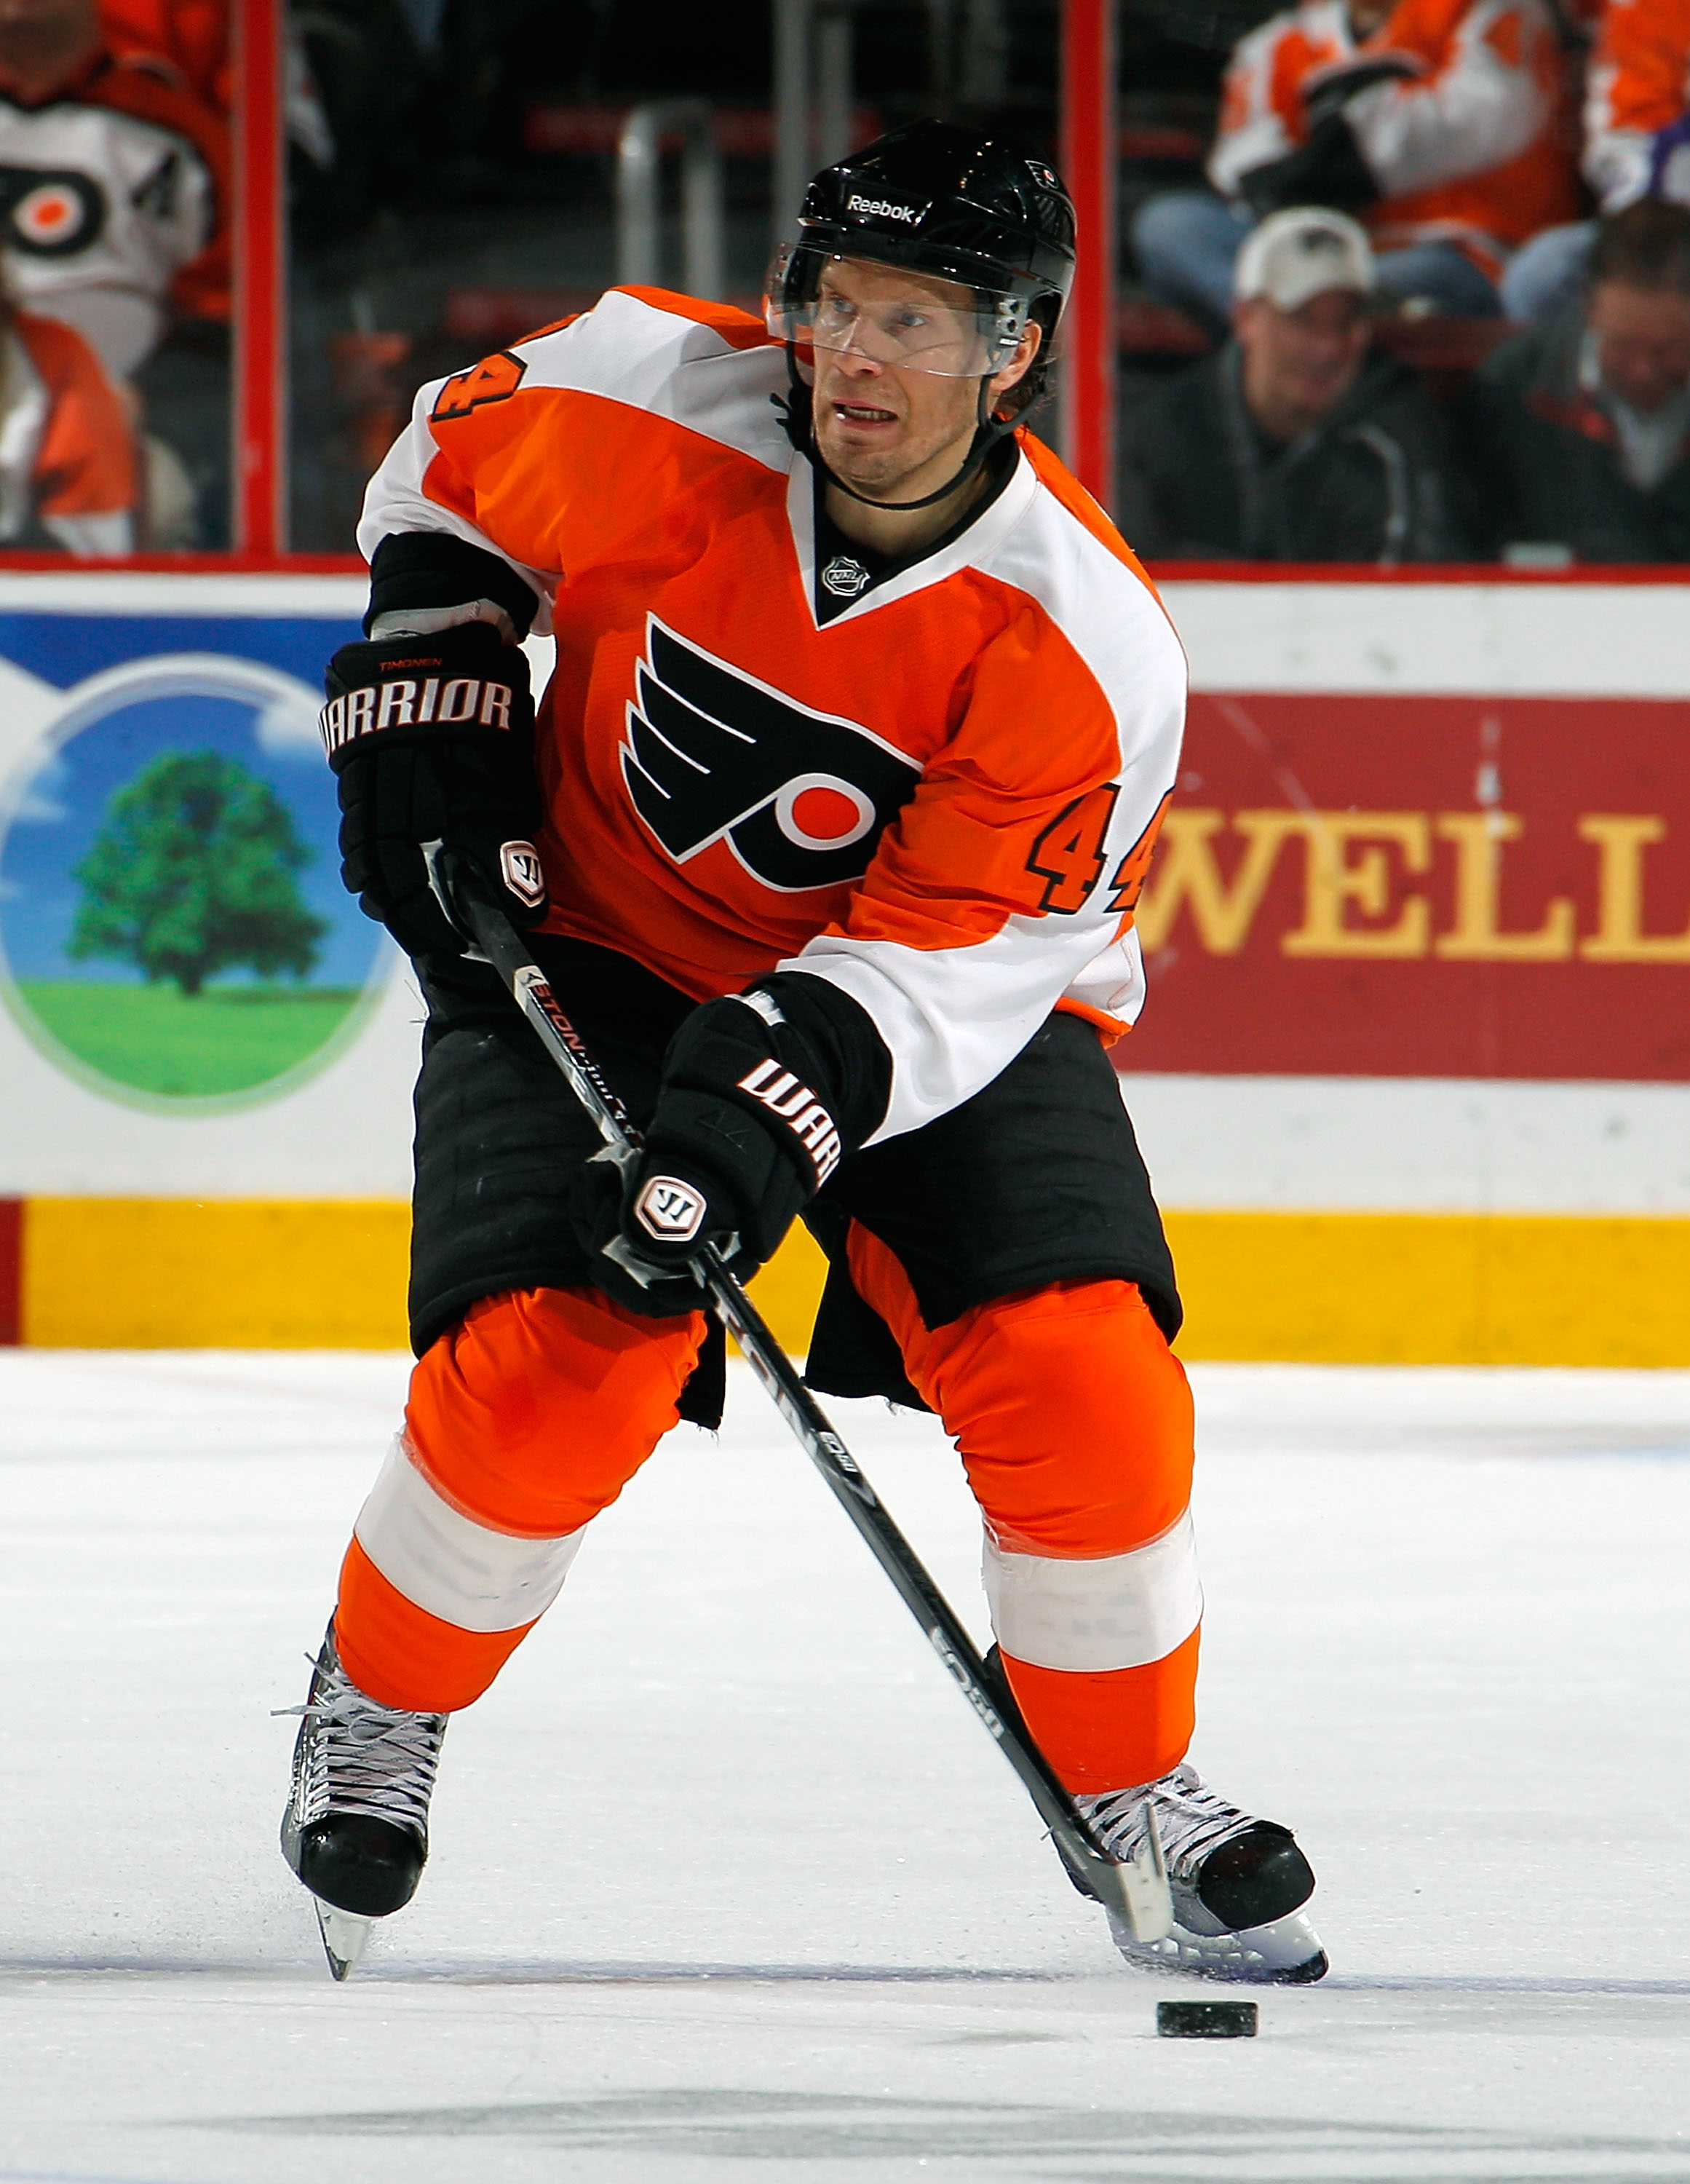 Chris Pronger of the Philadelphia Flyers skates with the puck